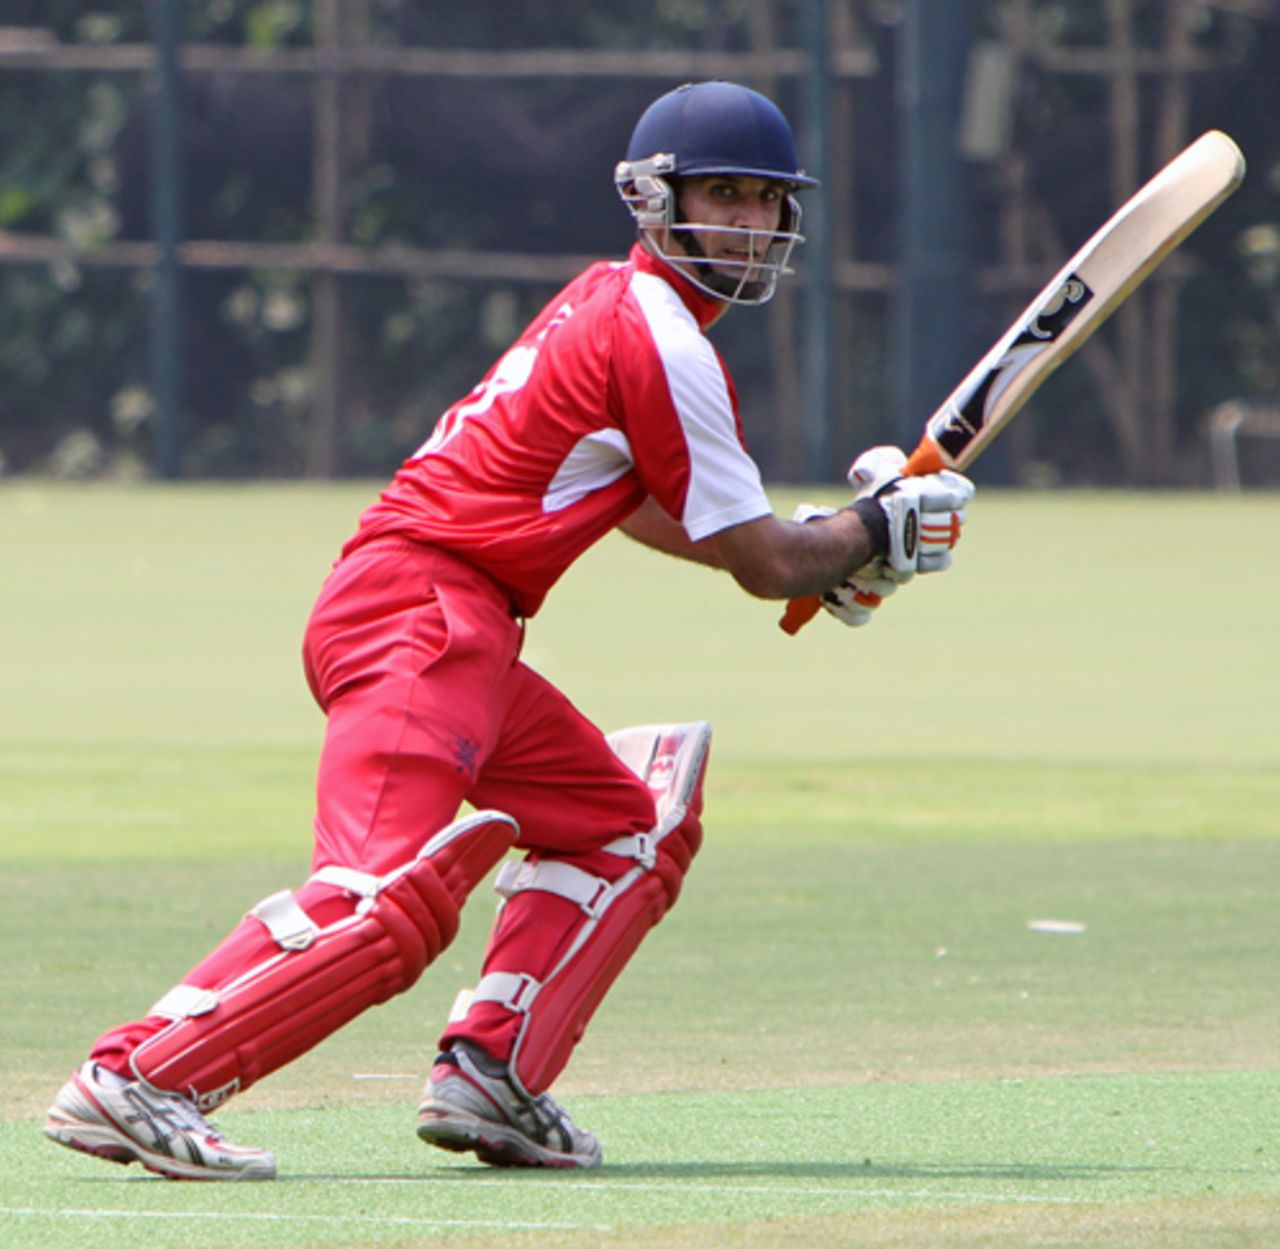 Hussain Butt scored a brilliant 118 for Hong Kong against the touring Footscray Edgewater Cricket Club from Victoria, Australia in a match played at the Hong Kong Cricket Club on 19th September 2010 